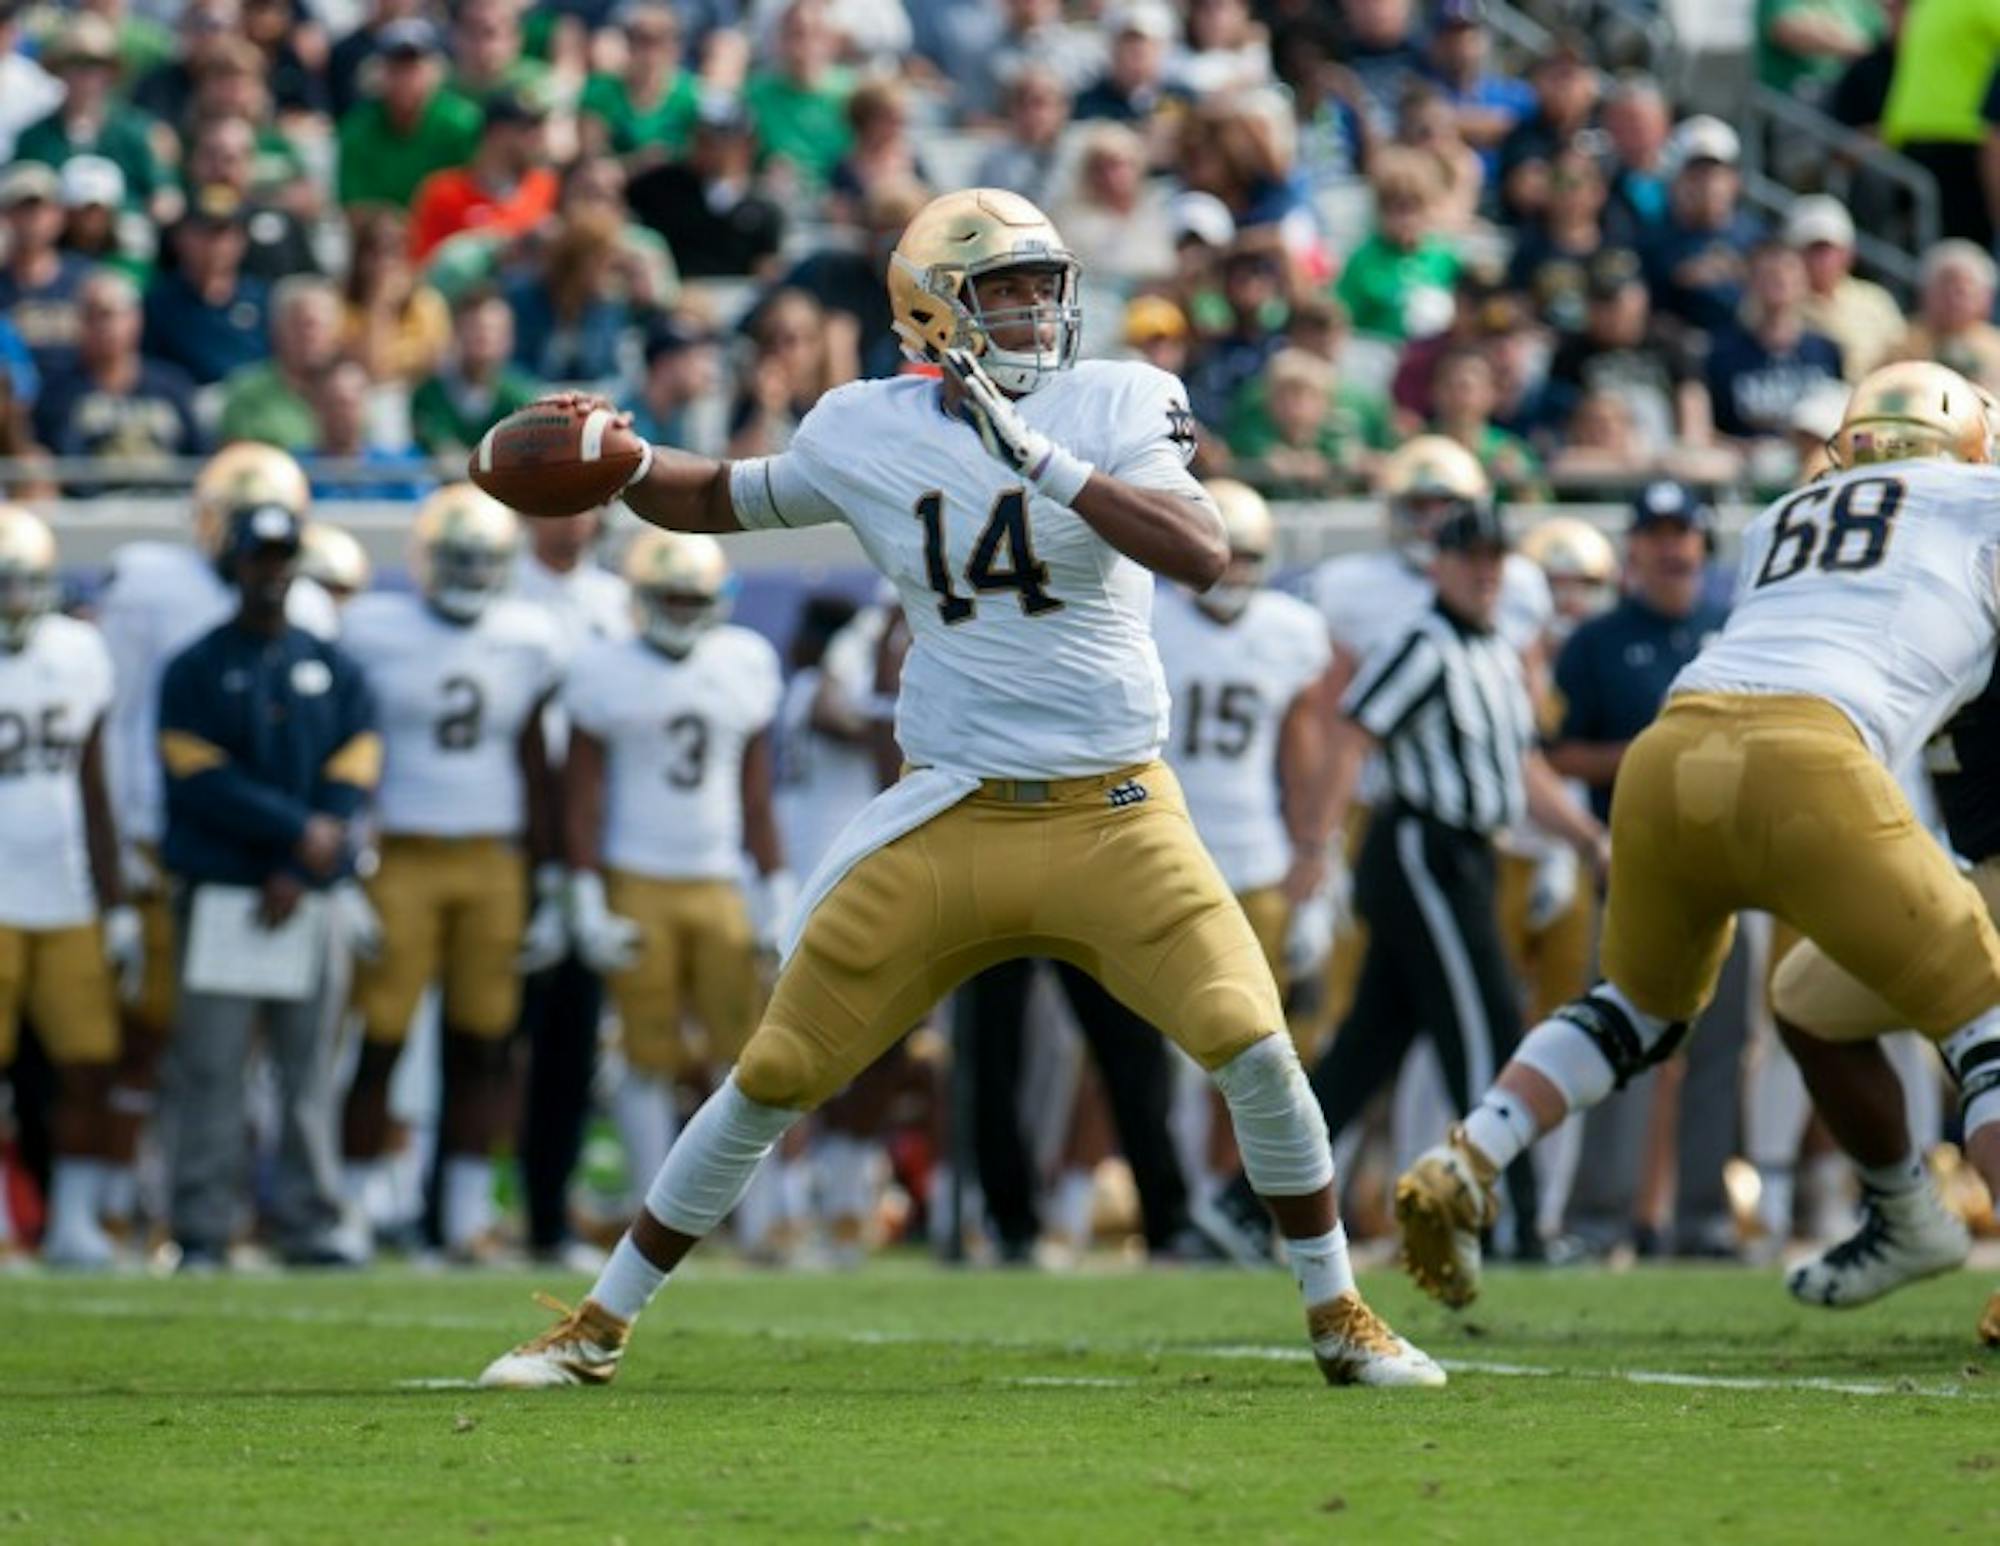 DeShone Kizer gets set to make a pass during Notre Dame's 28-27 loss to Navy on Nov. 5. Kizer announced Monday that he will declare for the NFL Draft.